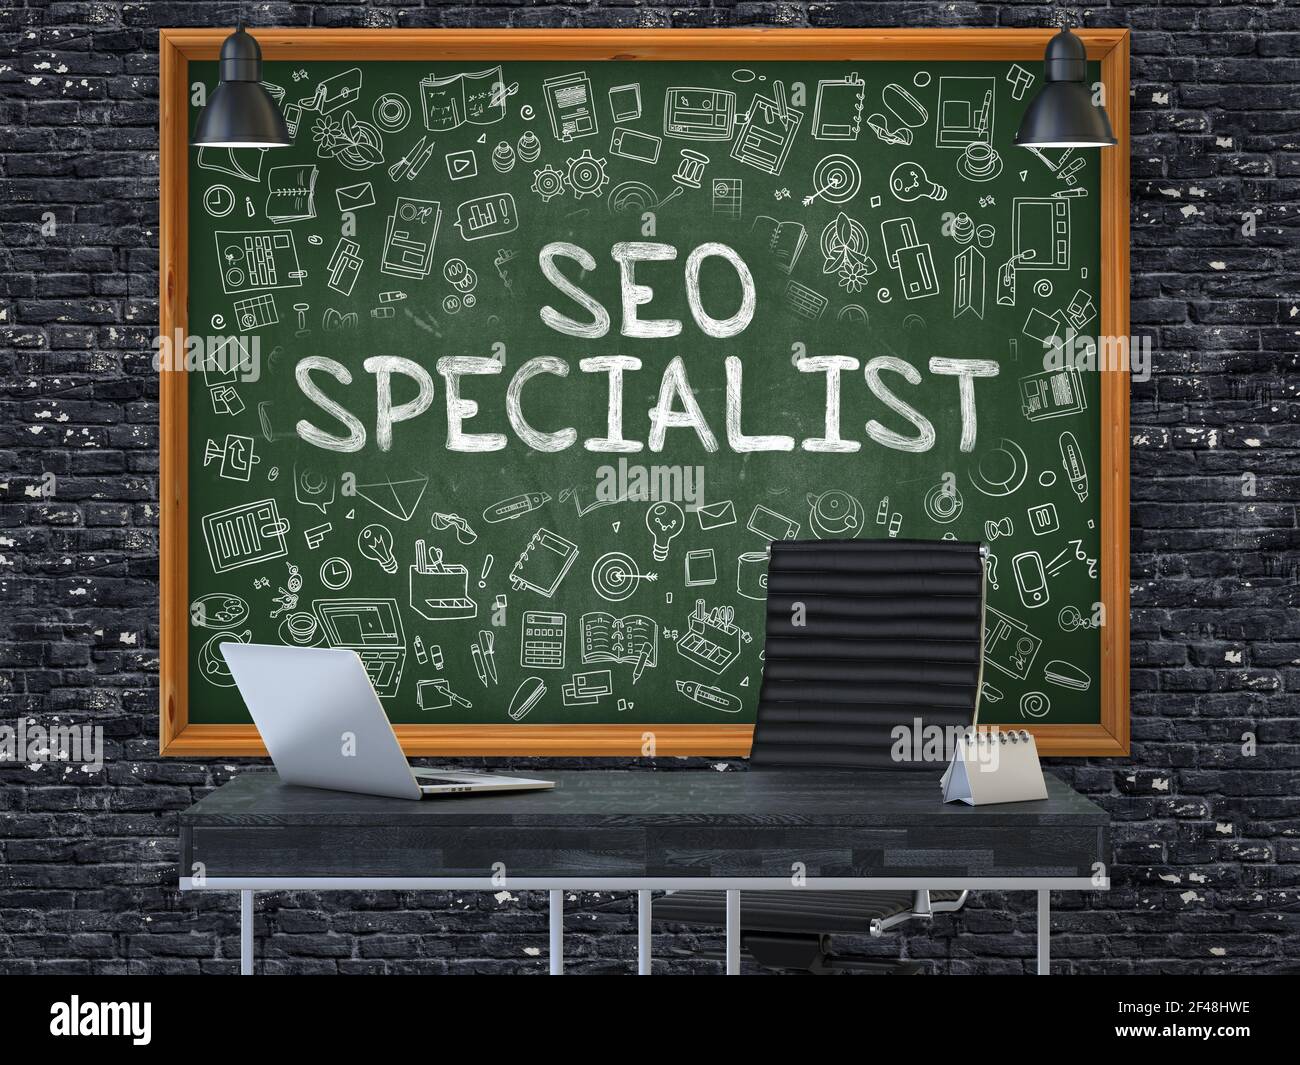 SEO - Search Engine Optimization - Specialist Concept Handwritten on Green Chalkboard with Doodle Icons. Office Interior with Modern Workplace. Dark Brick Wall Background. 3D. Stock Photo